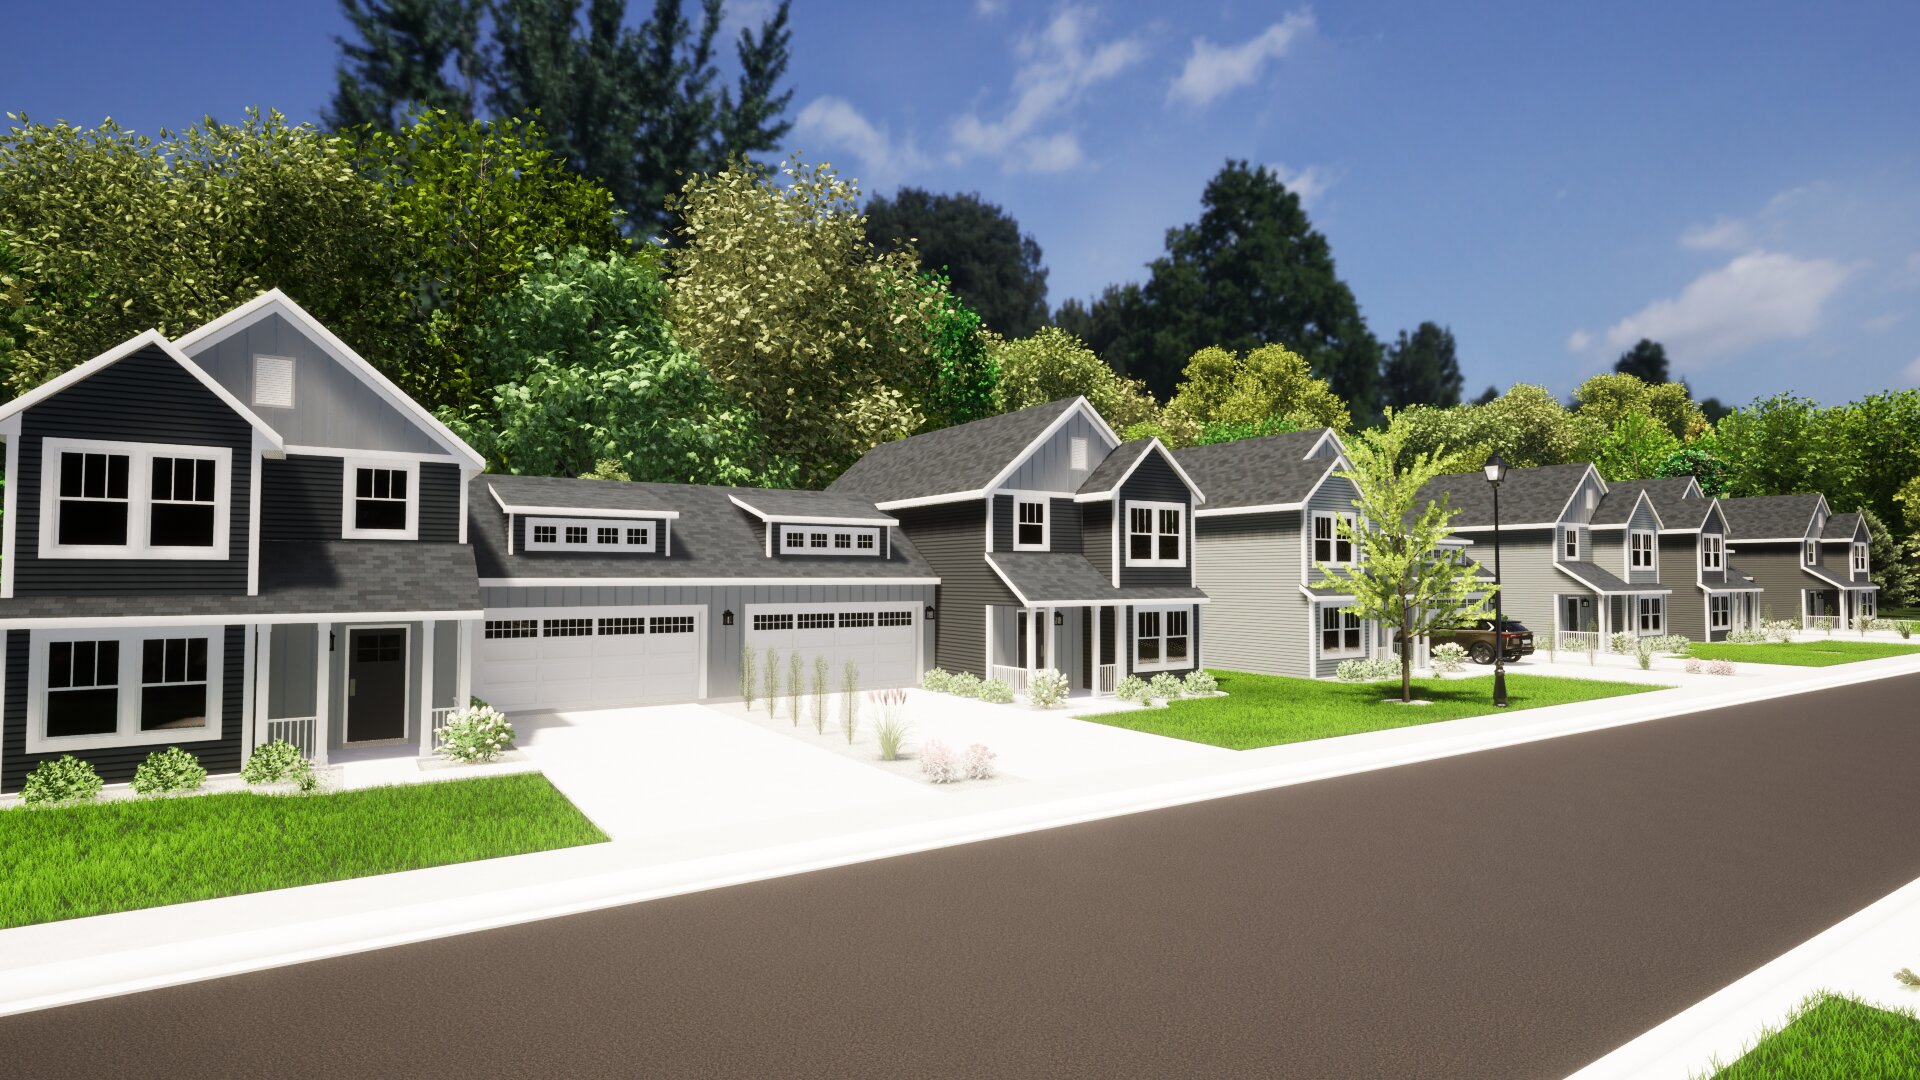 Concept rendering courtesy of Allen Edwin Homes